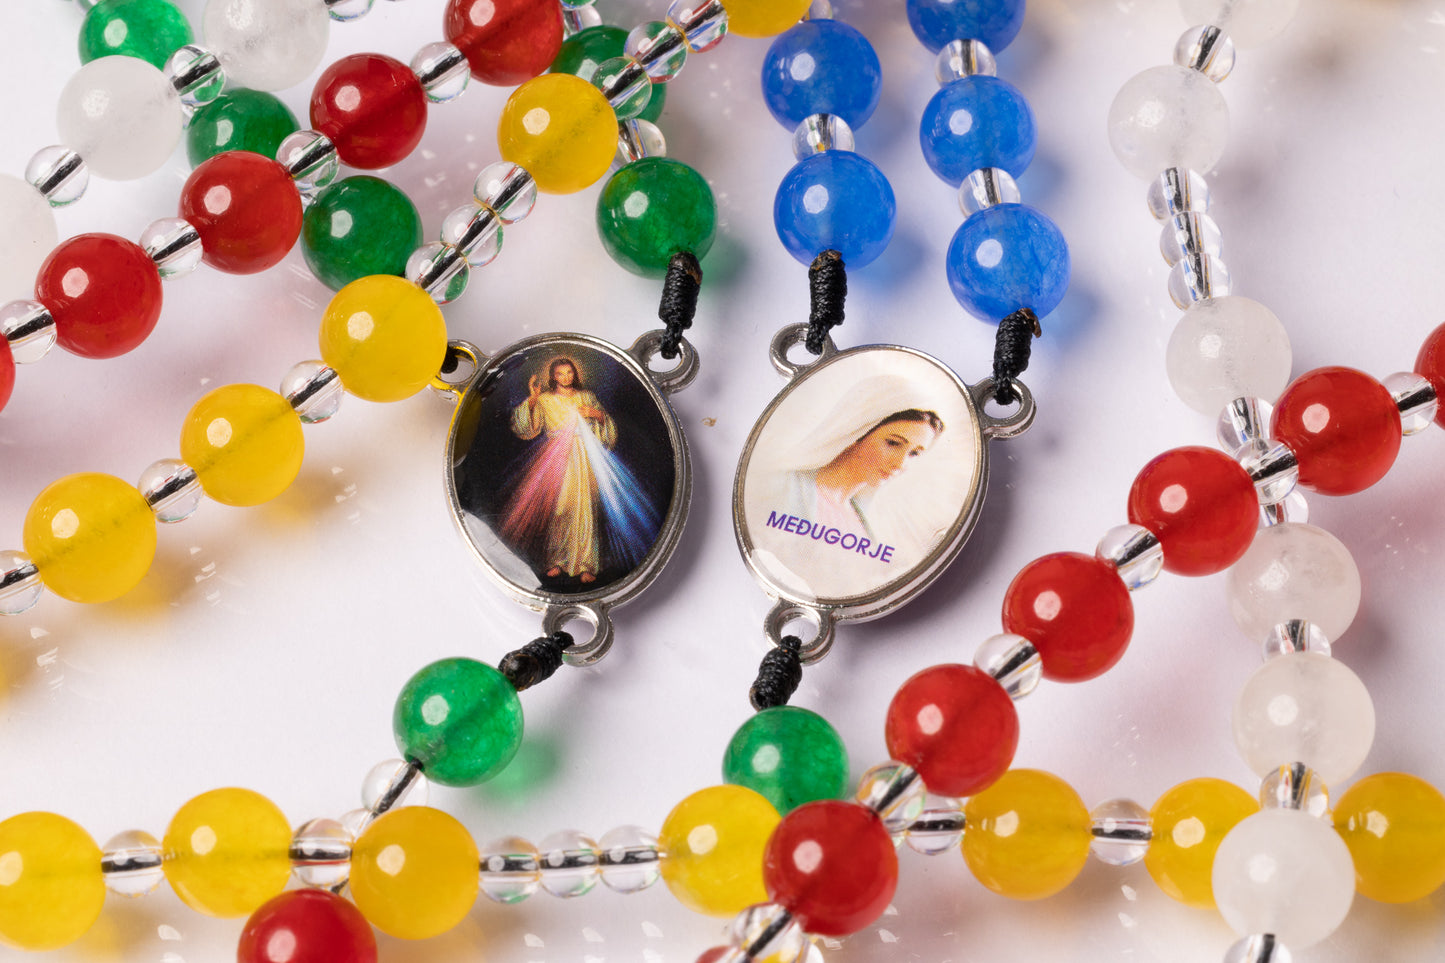 Rosary Bead - Divine Mercy/Our Lady of Medjugorje